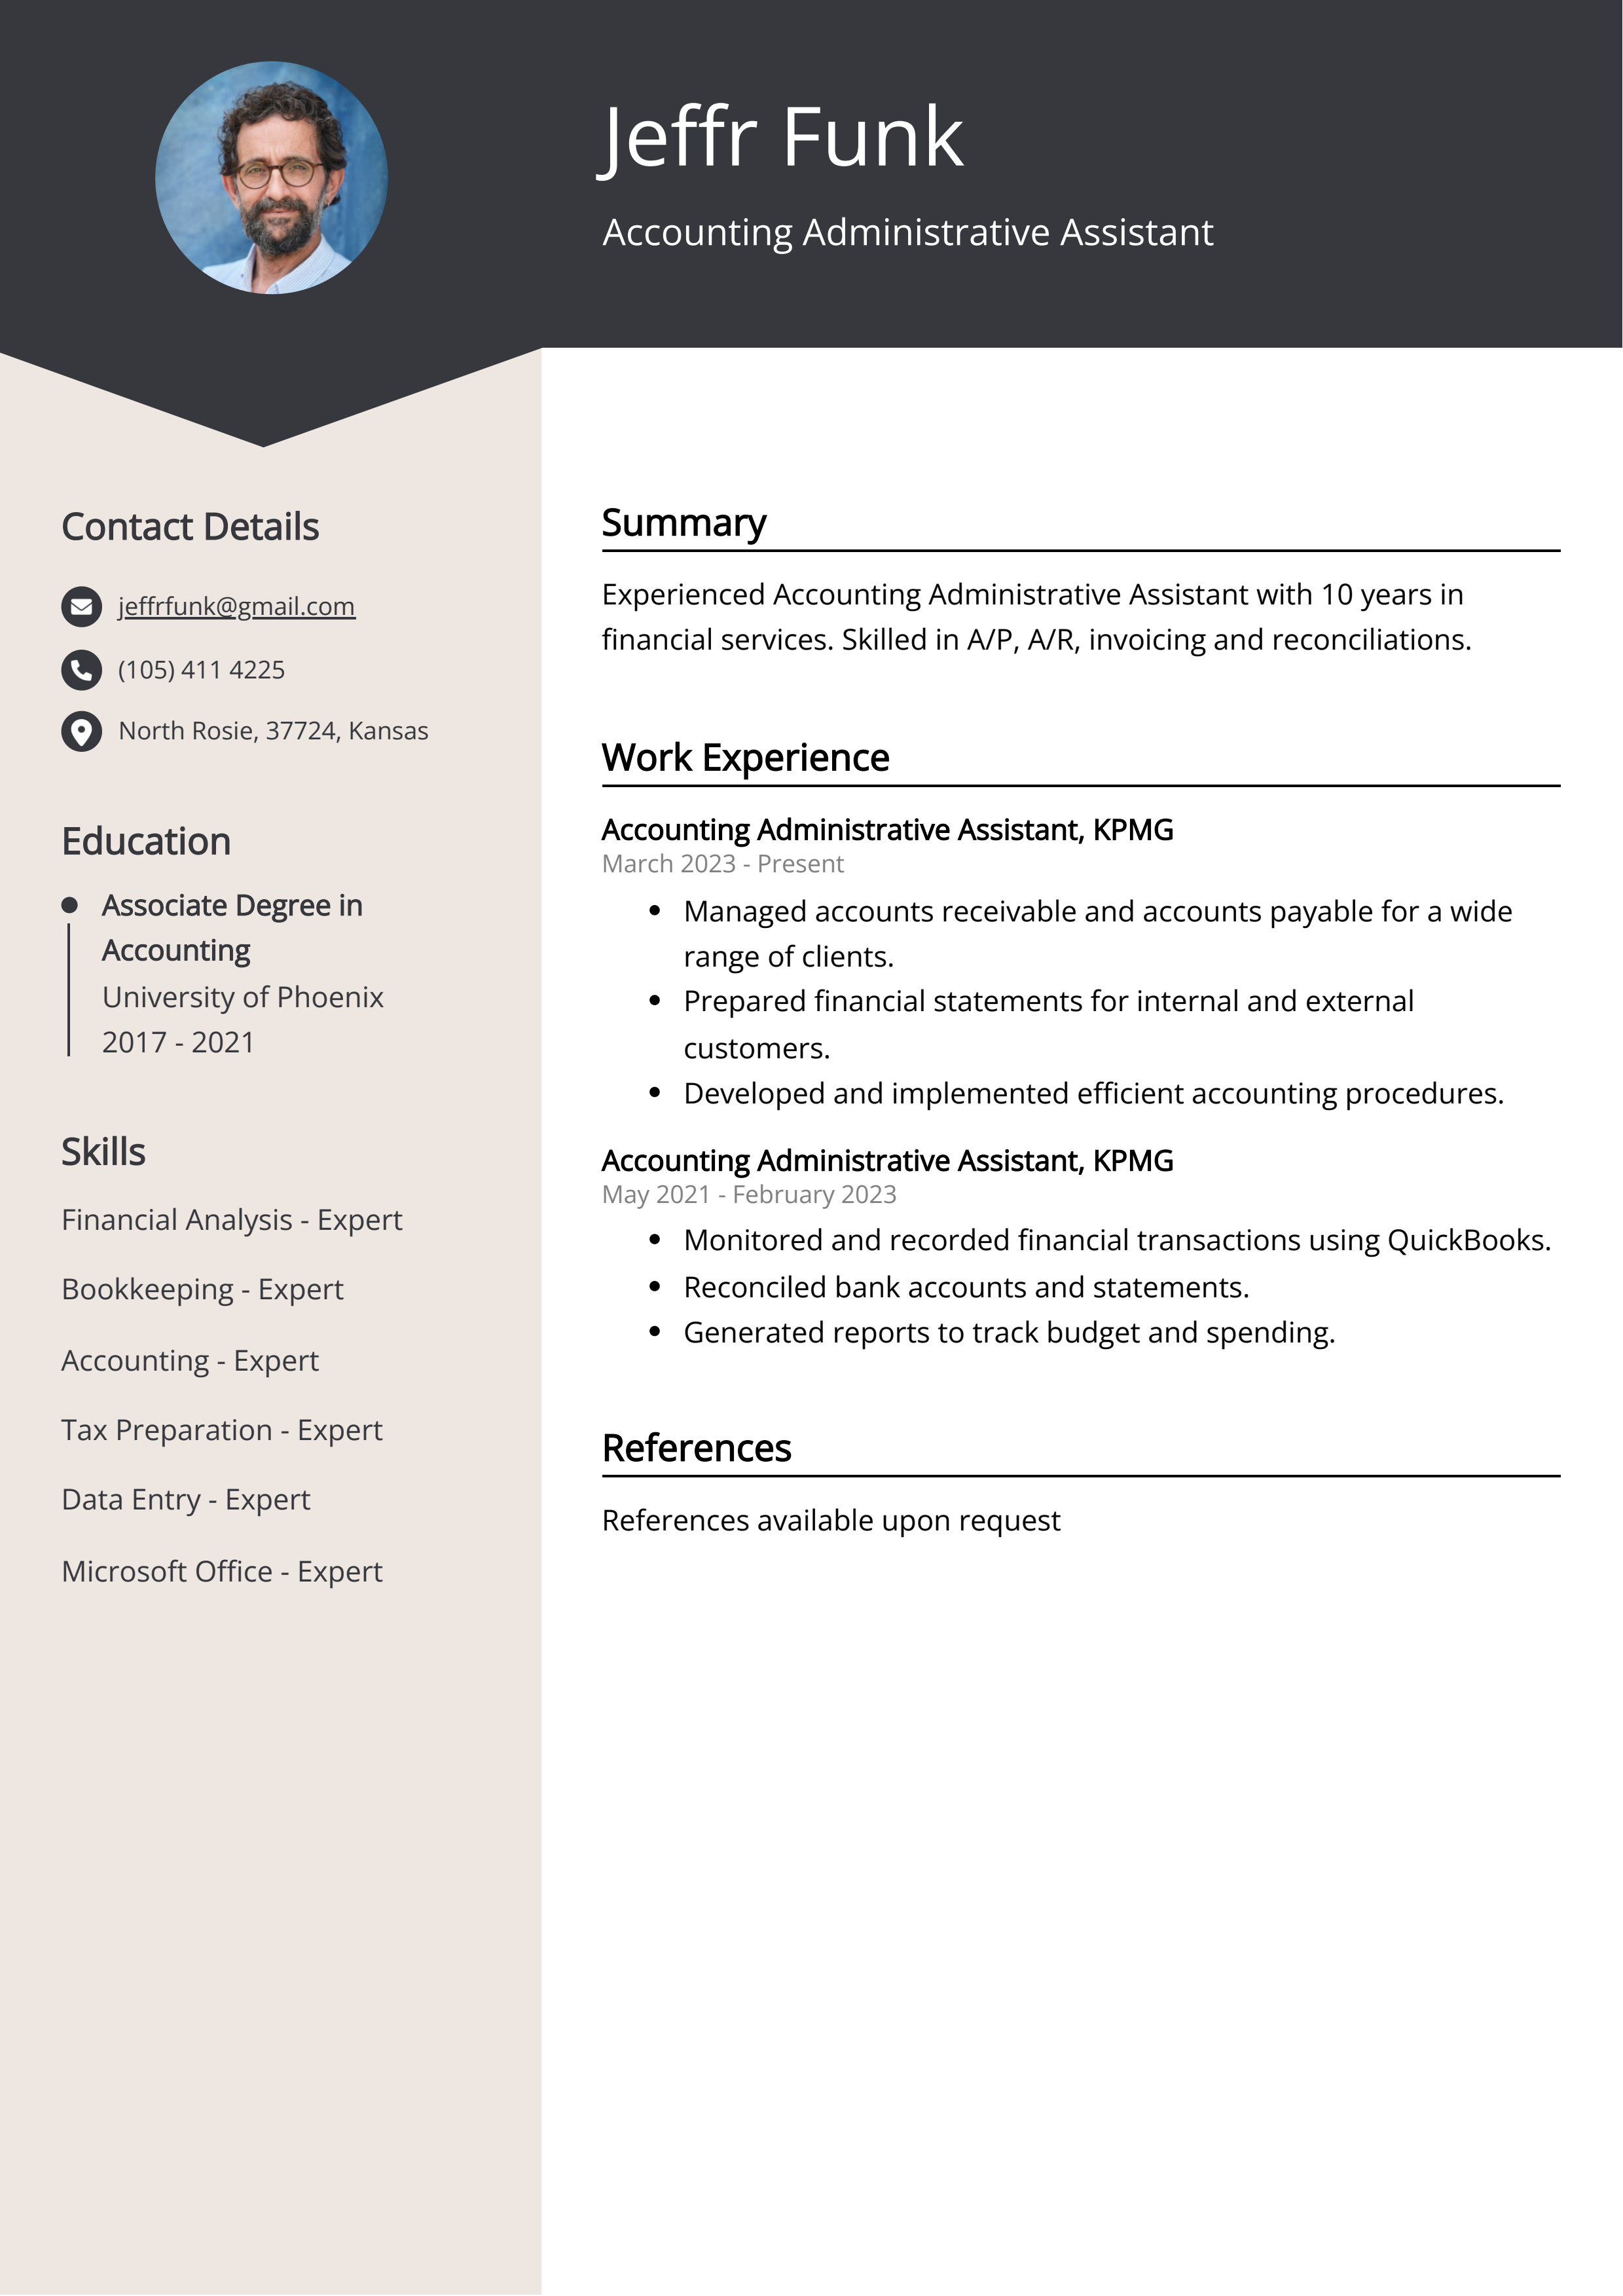 Accounting Administrative Assistant CV Example